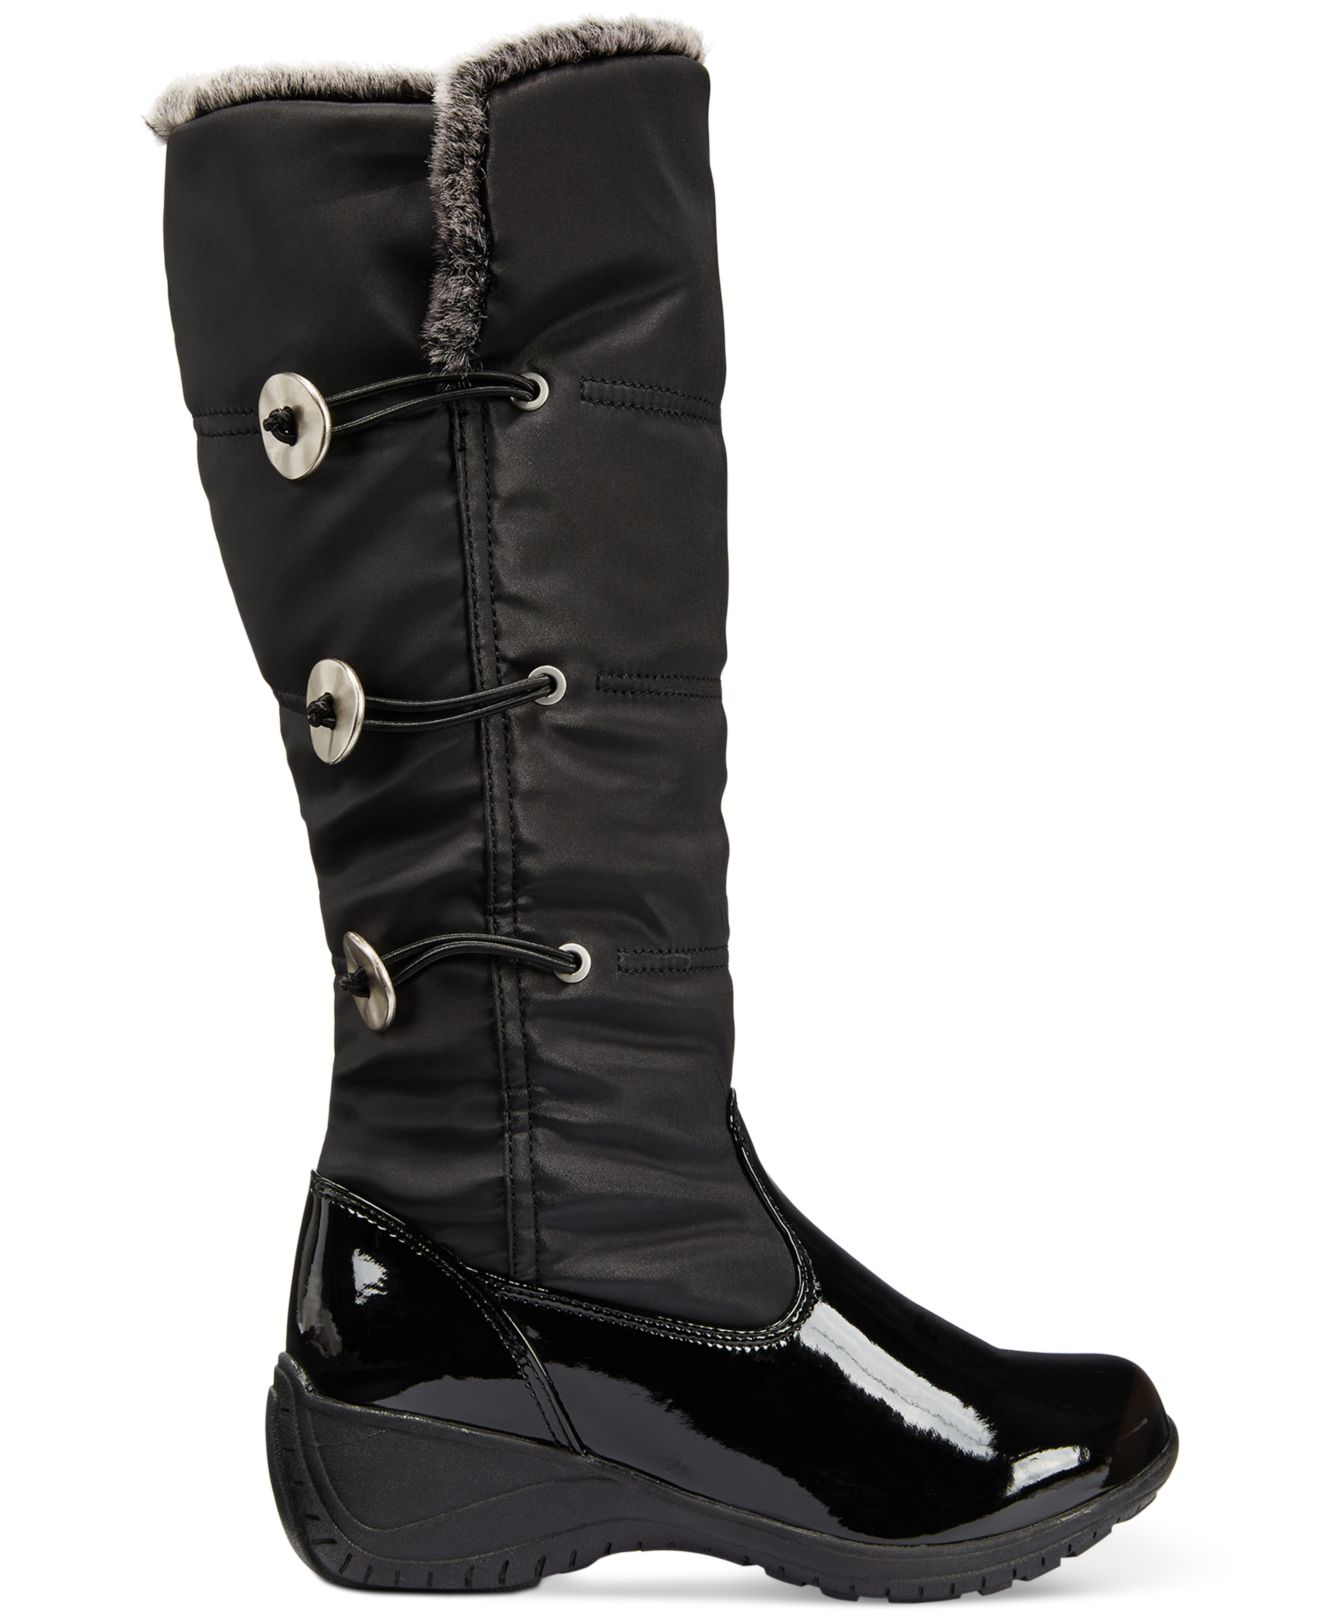 Lyst - Khombu Abigail Cold Weather Wedge Boots in Black